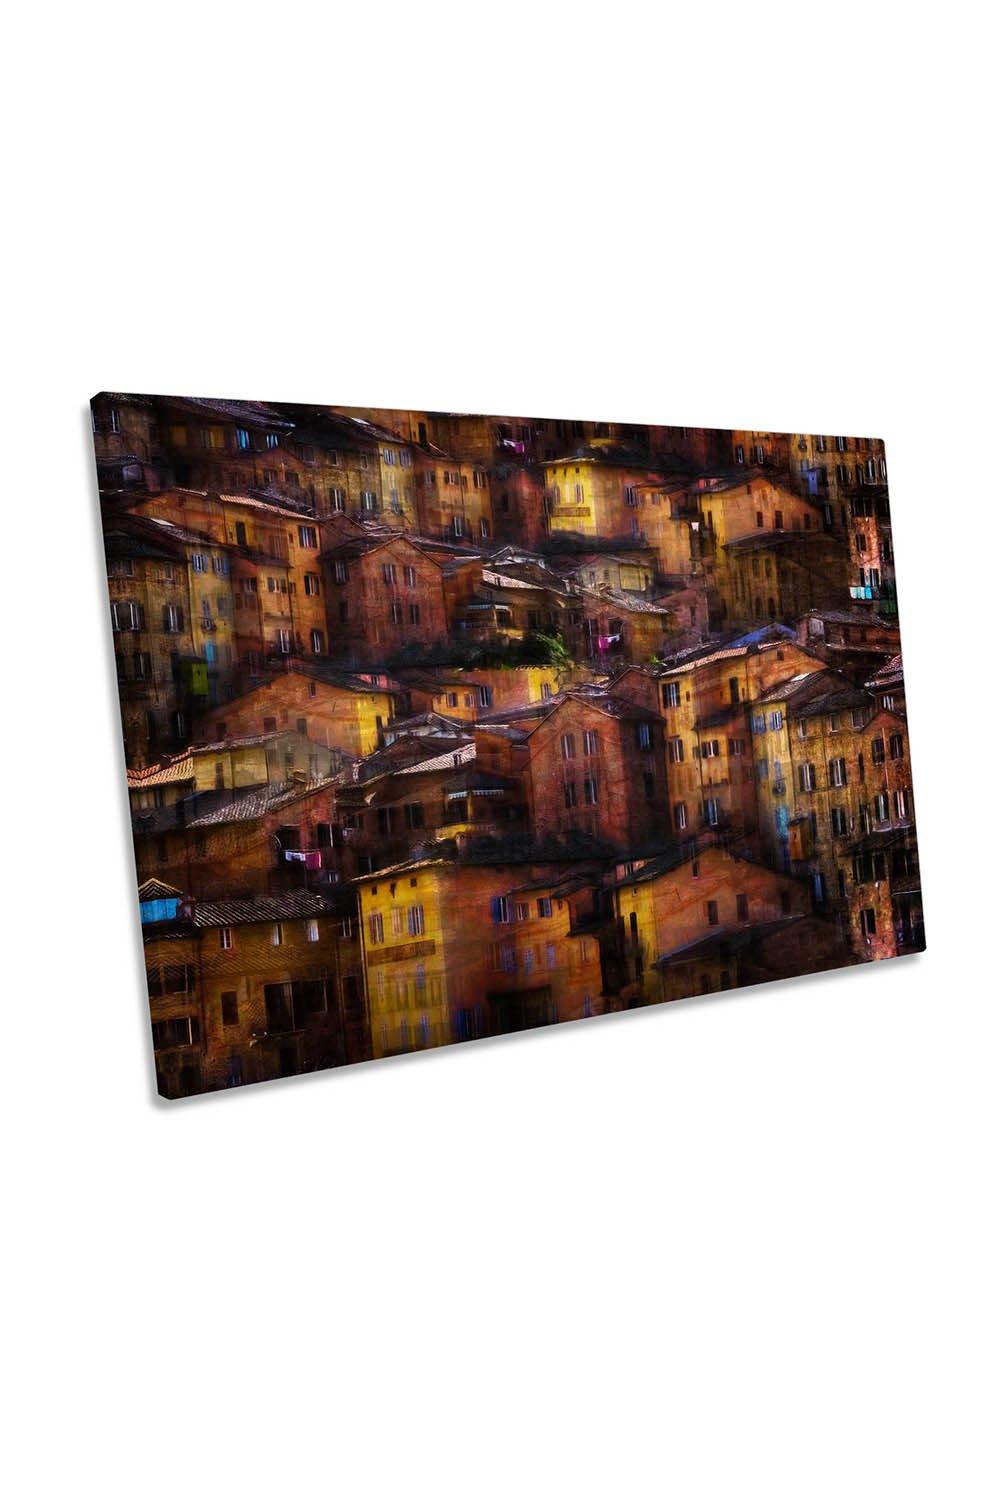 Living on the Hill Mountain Village Canvas Wall Art Picture Print